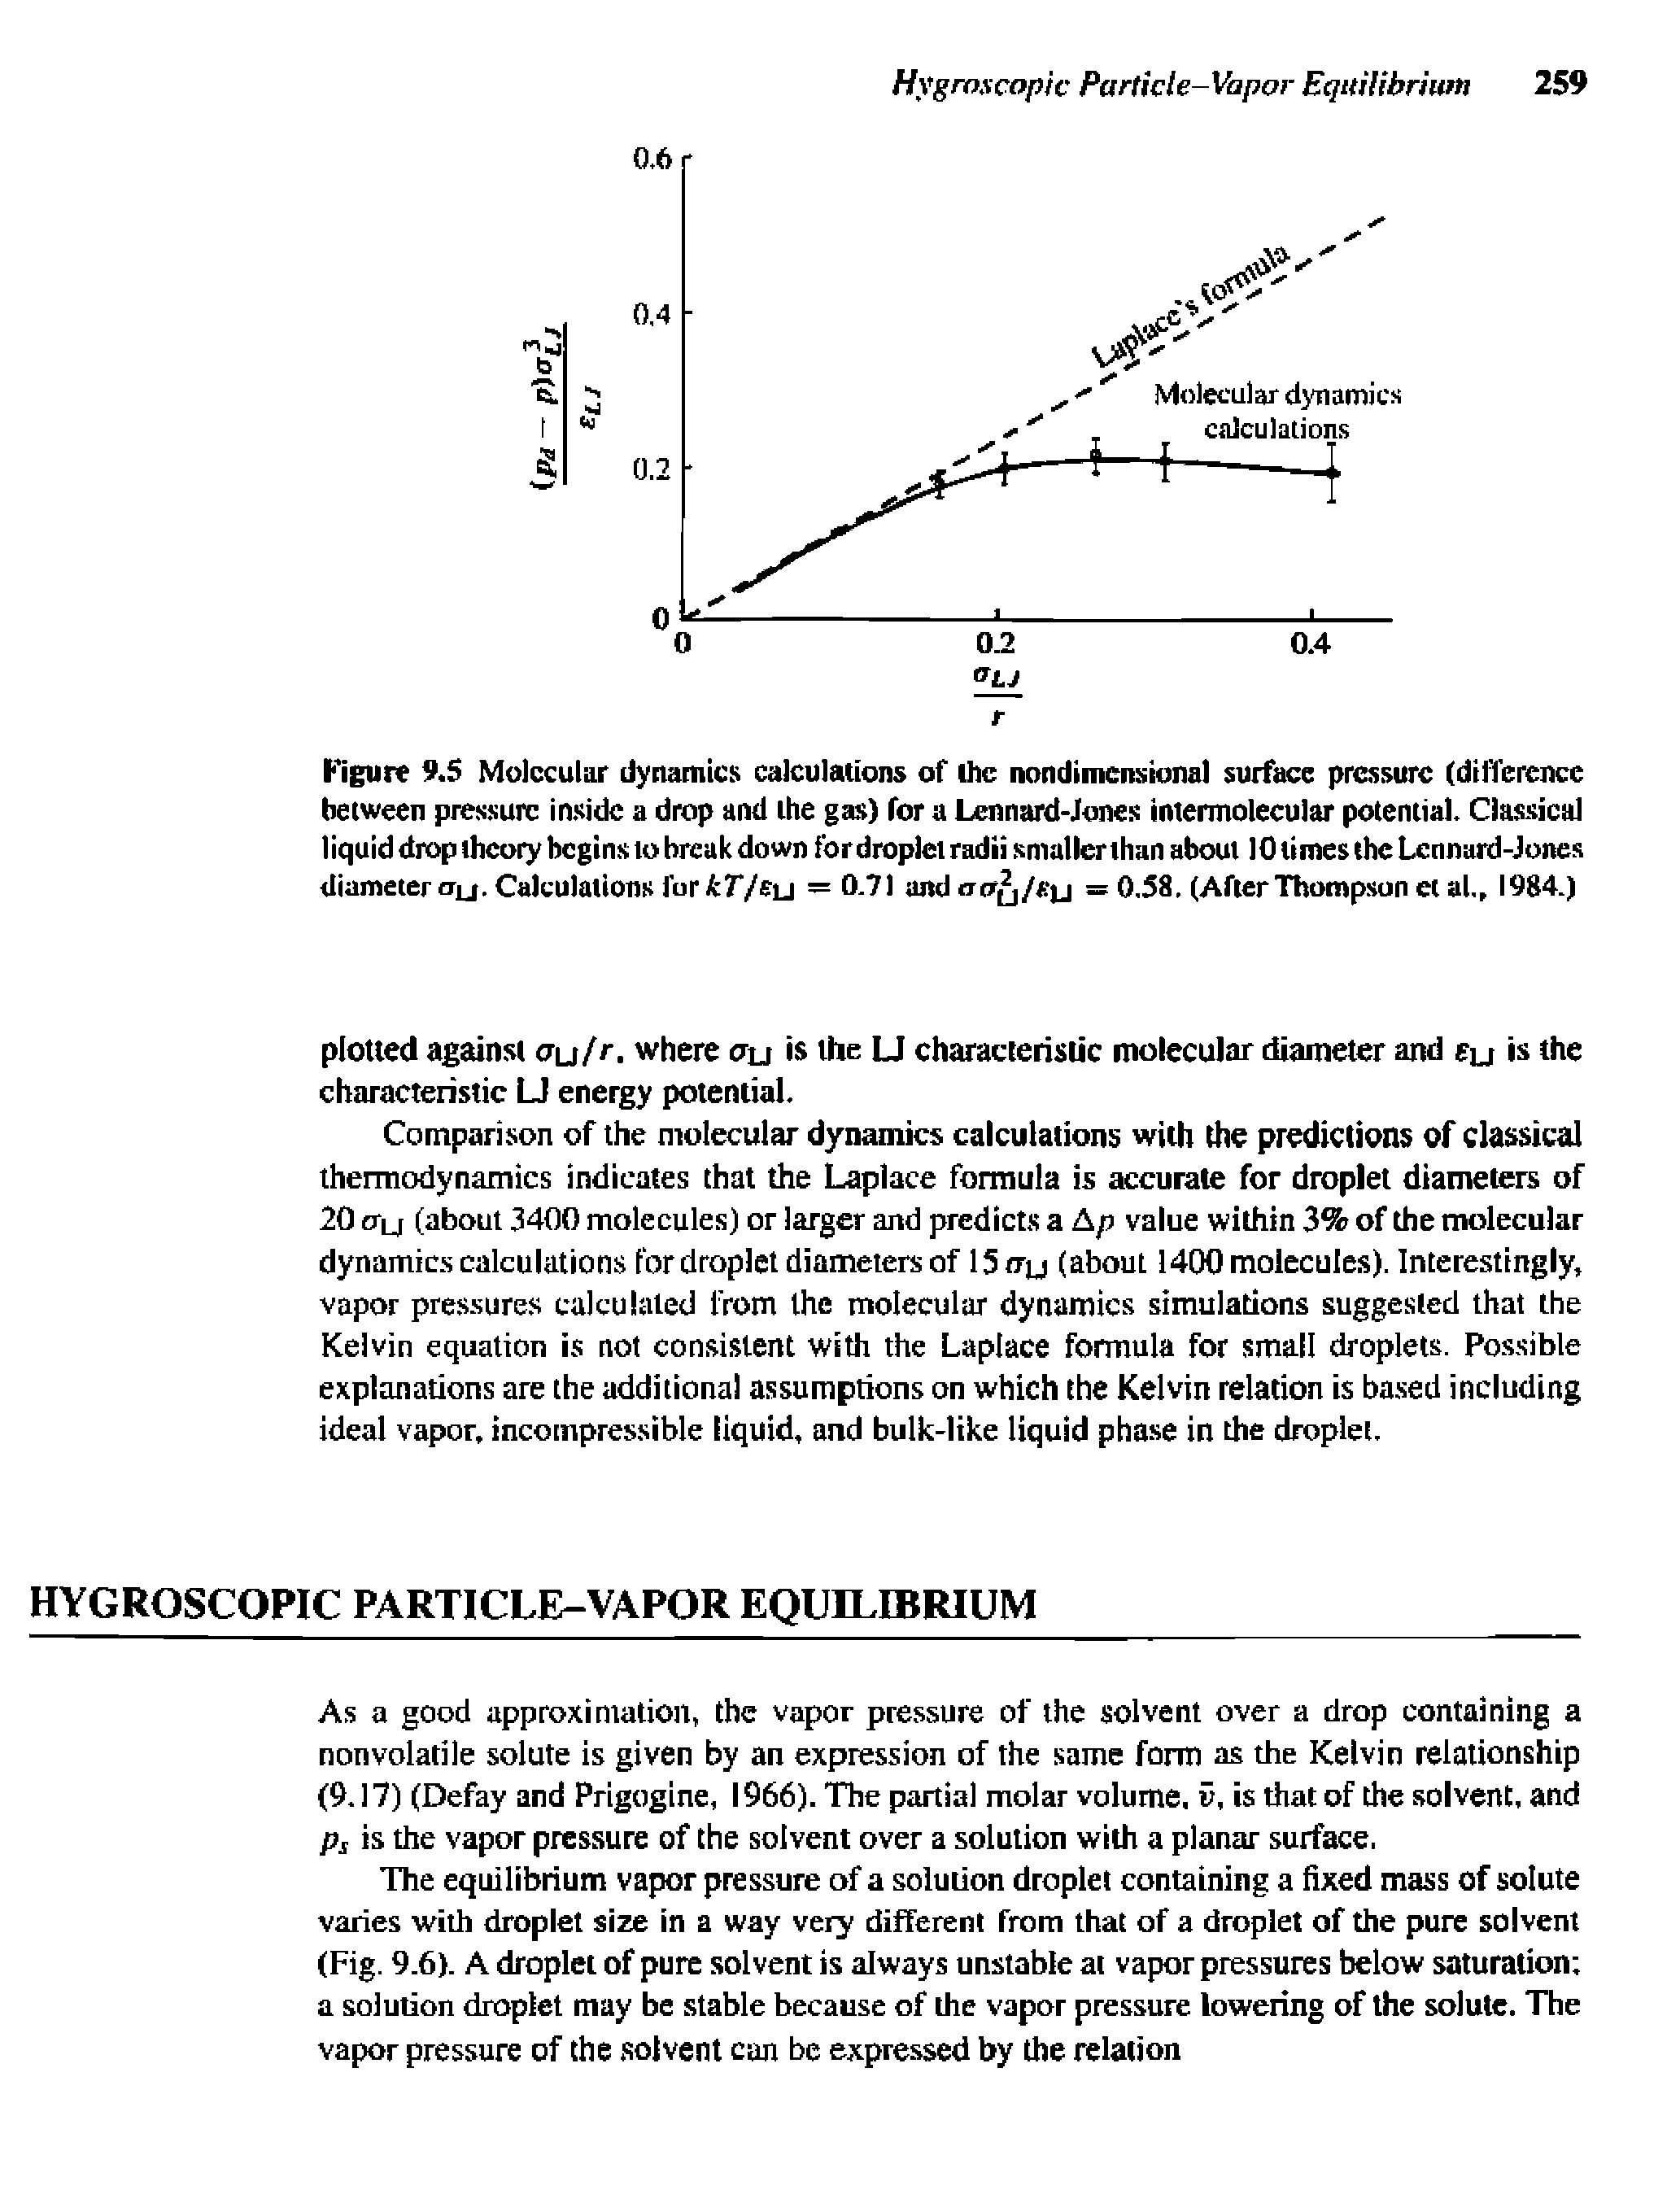 Figure 9.5 Molecular dynamics calculations of the nondimcnsional surface pressure (difference between pressure inside a drop and the gas) for a Lennard-Jones intermolecular potential. Classical liquid drop theory begins to break down fordroplei radii smallcrihan about 10 times the Lennard-Jones diameter CTij. Calculations for Ar/su = 0.71 and = 0,58. (After Thompson et al, 1984.)...